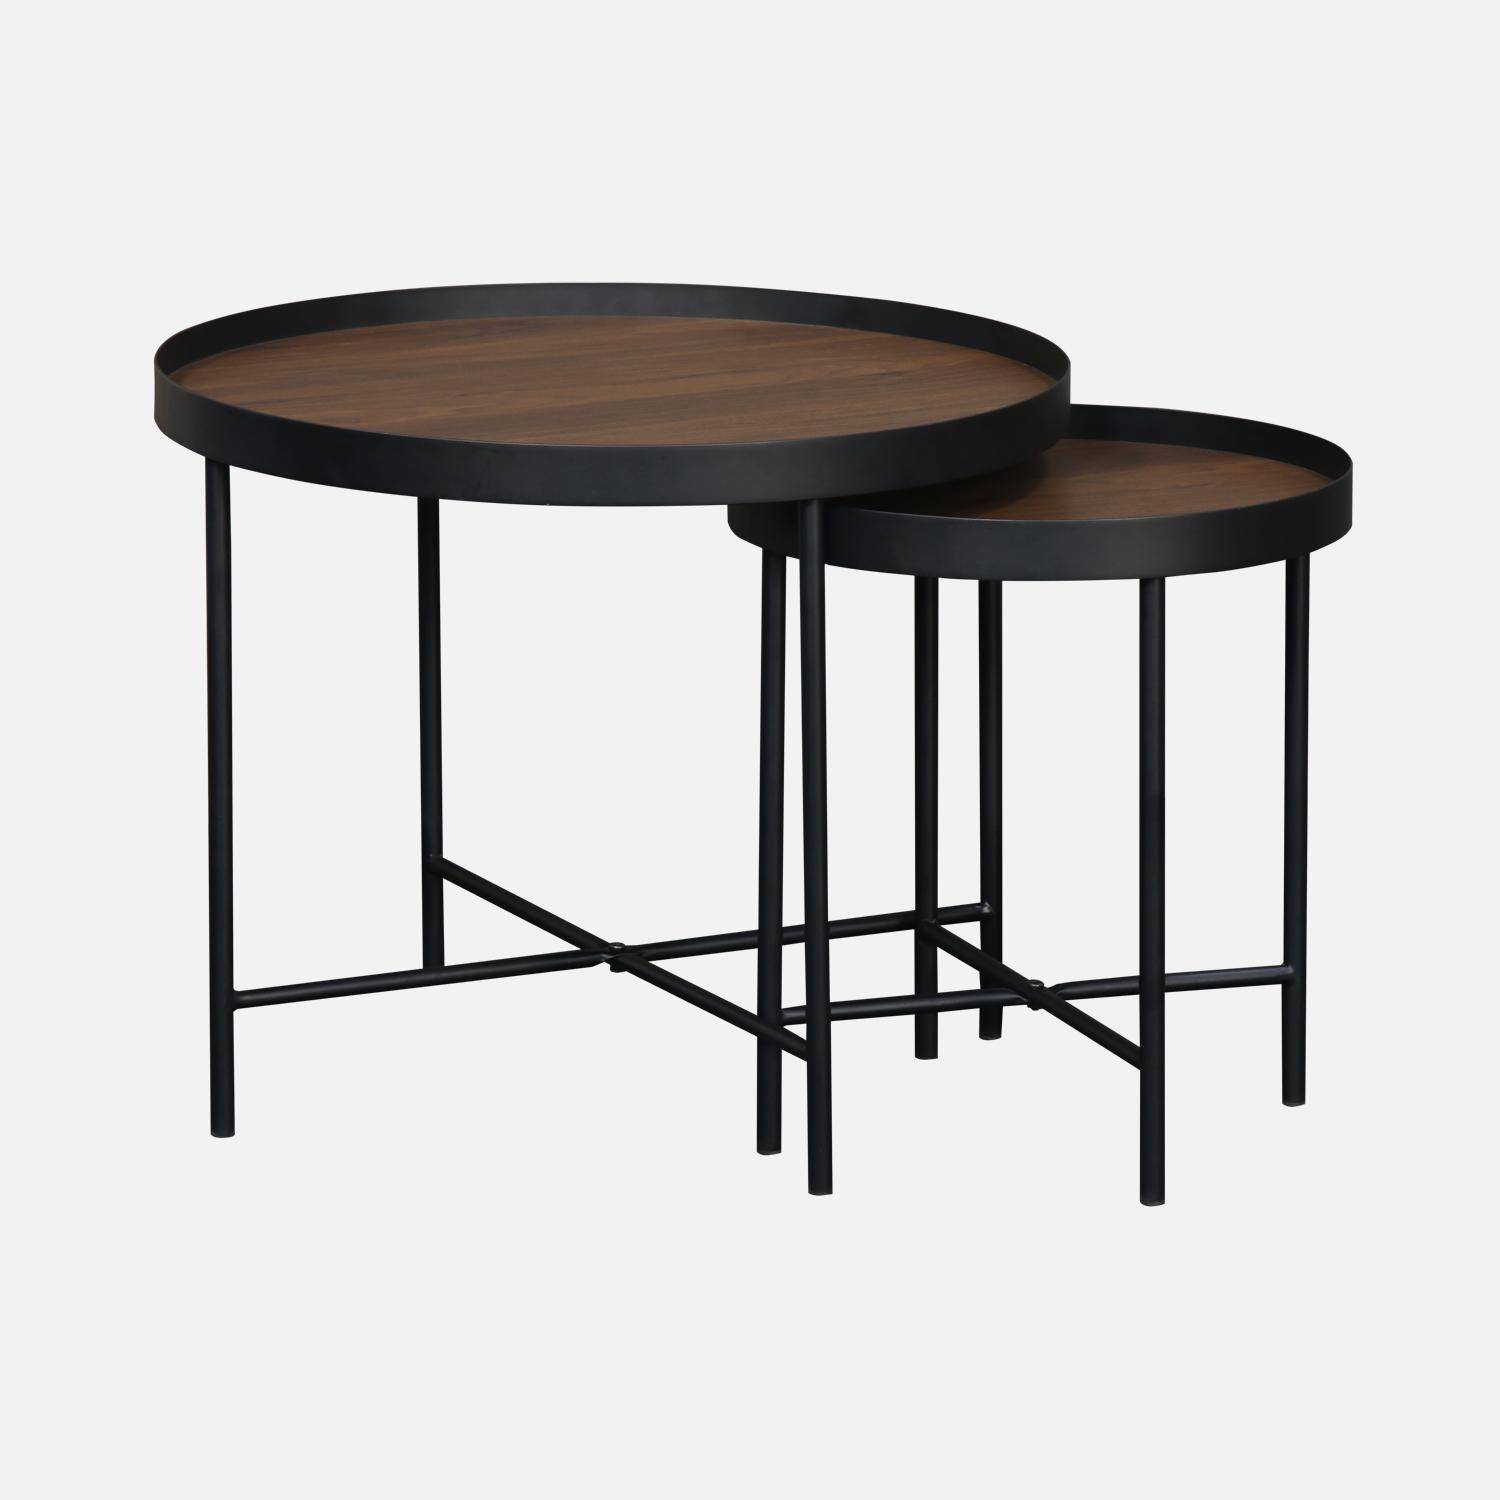 Set of 2 practical round nesting tables in walnut-effect MDF with black legs Photo3